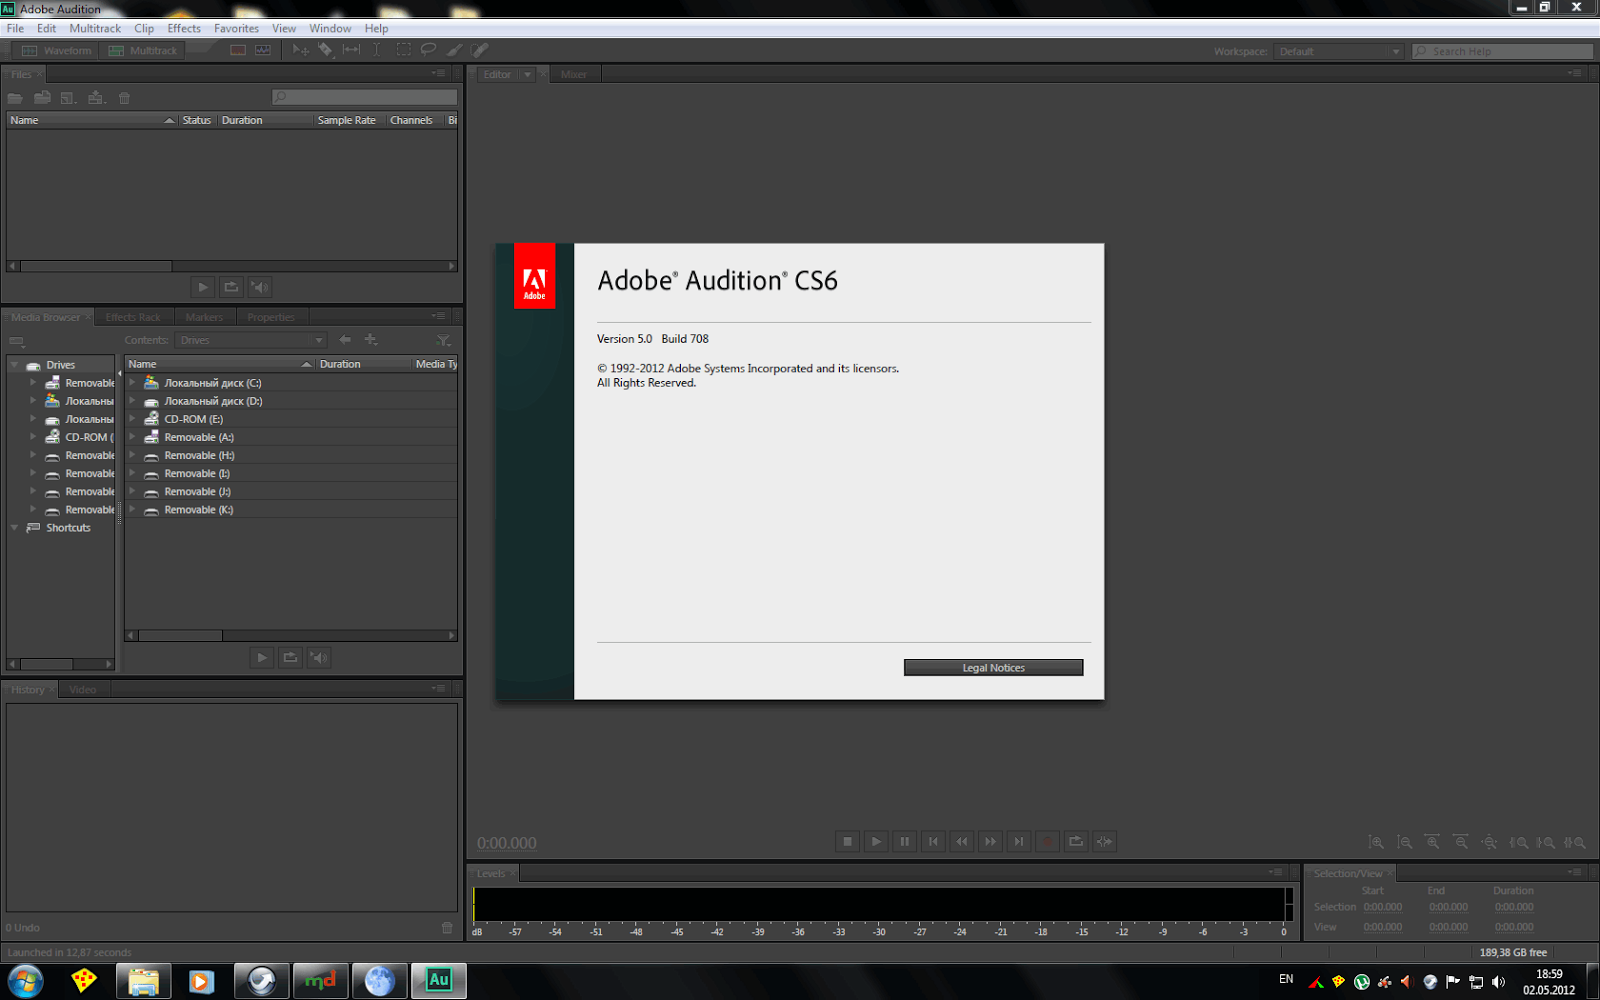 Adobe audition cs6 free download full version with crack free download windows 7 professional 64 bit